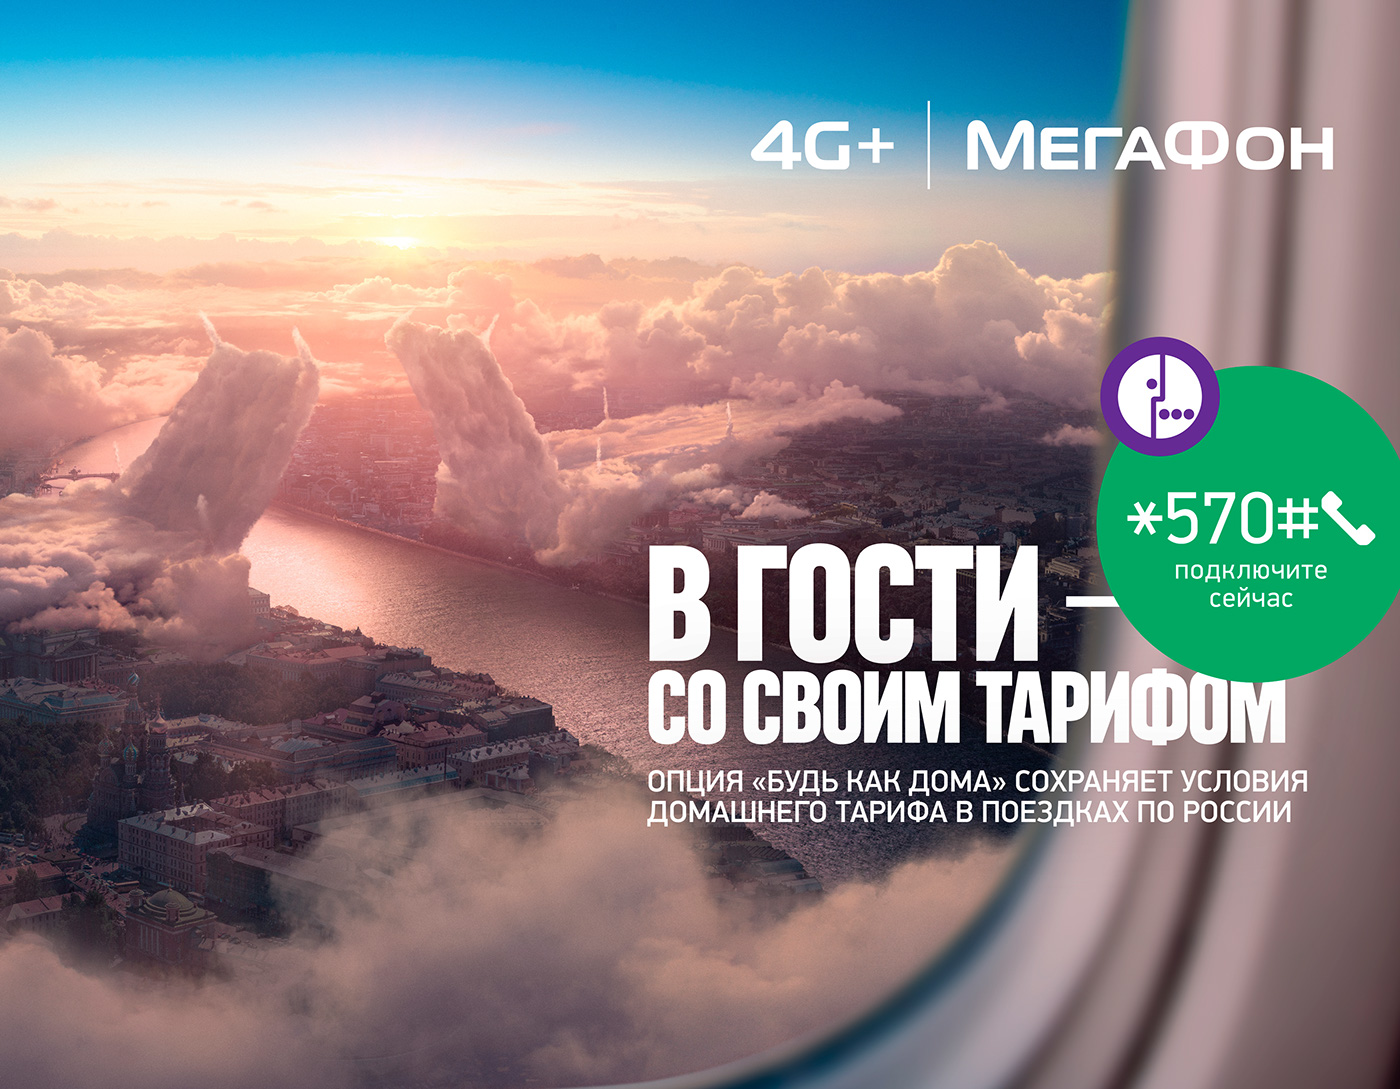 airport campaign flight megafon clouds OOH Advertising  plane carrier mobile